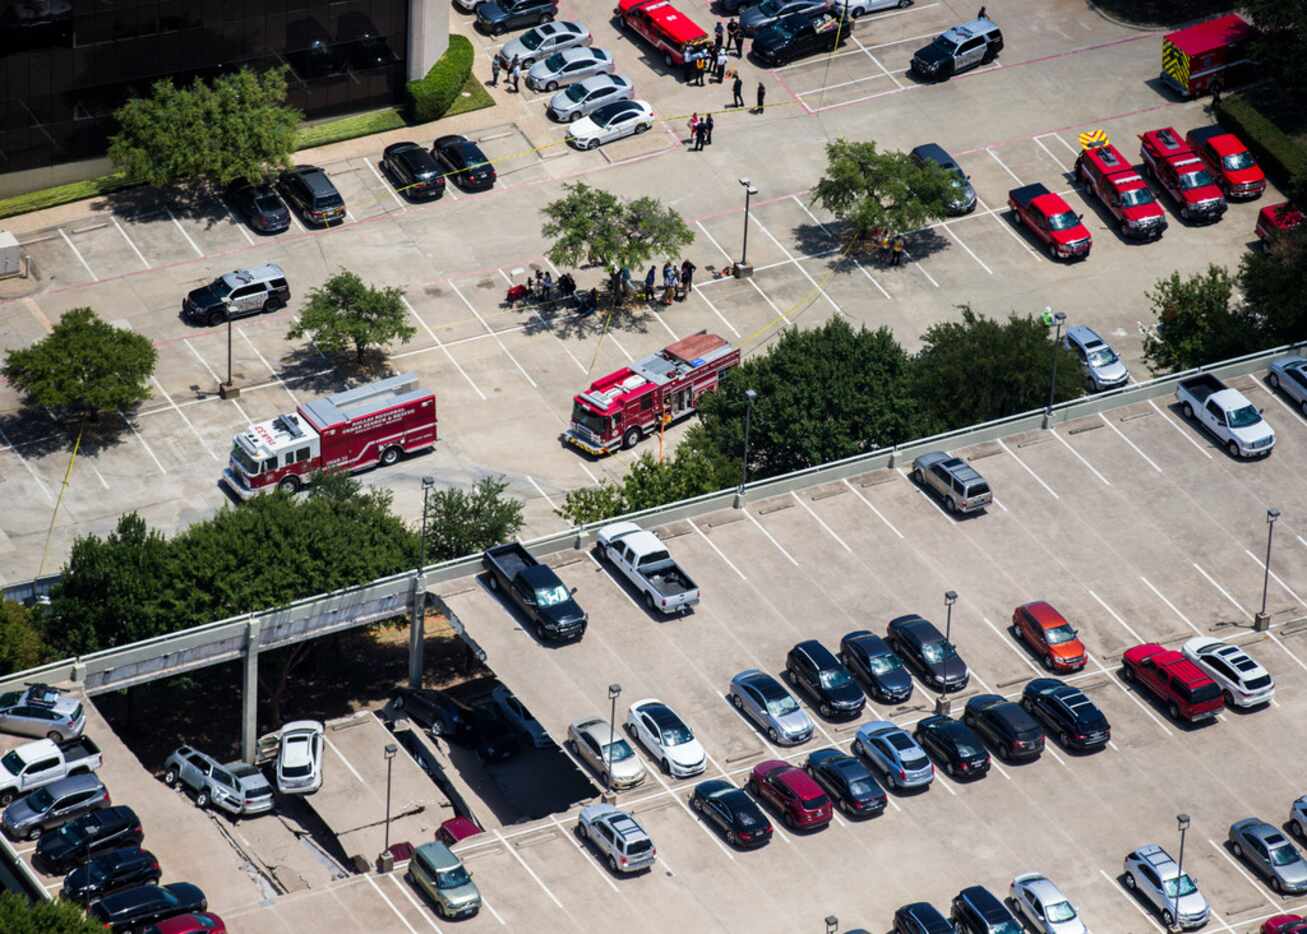 Emergency crews respond to a collapsed parking garage at 4545 Fuller Road in Irving on Tuesday.